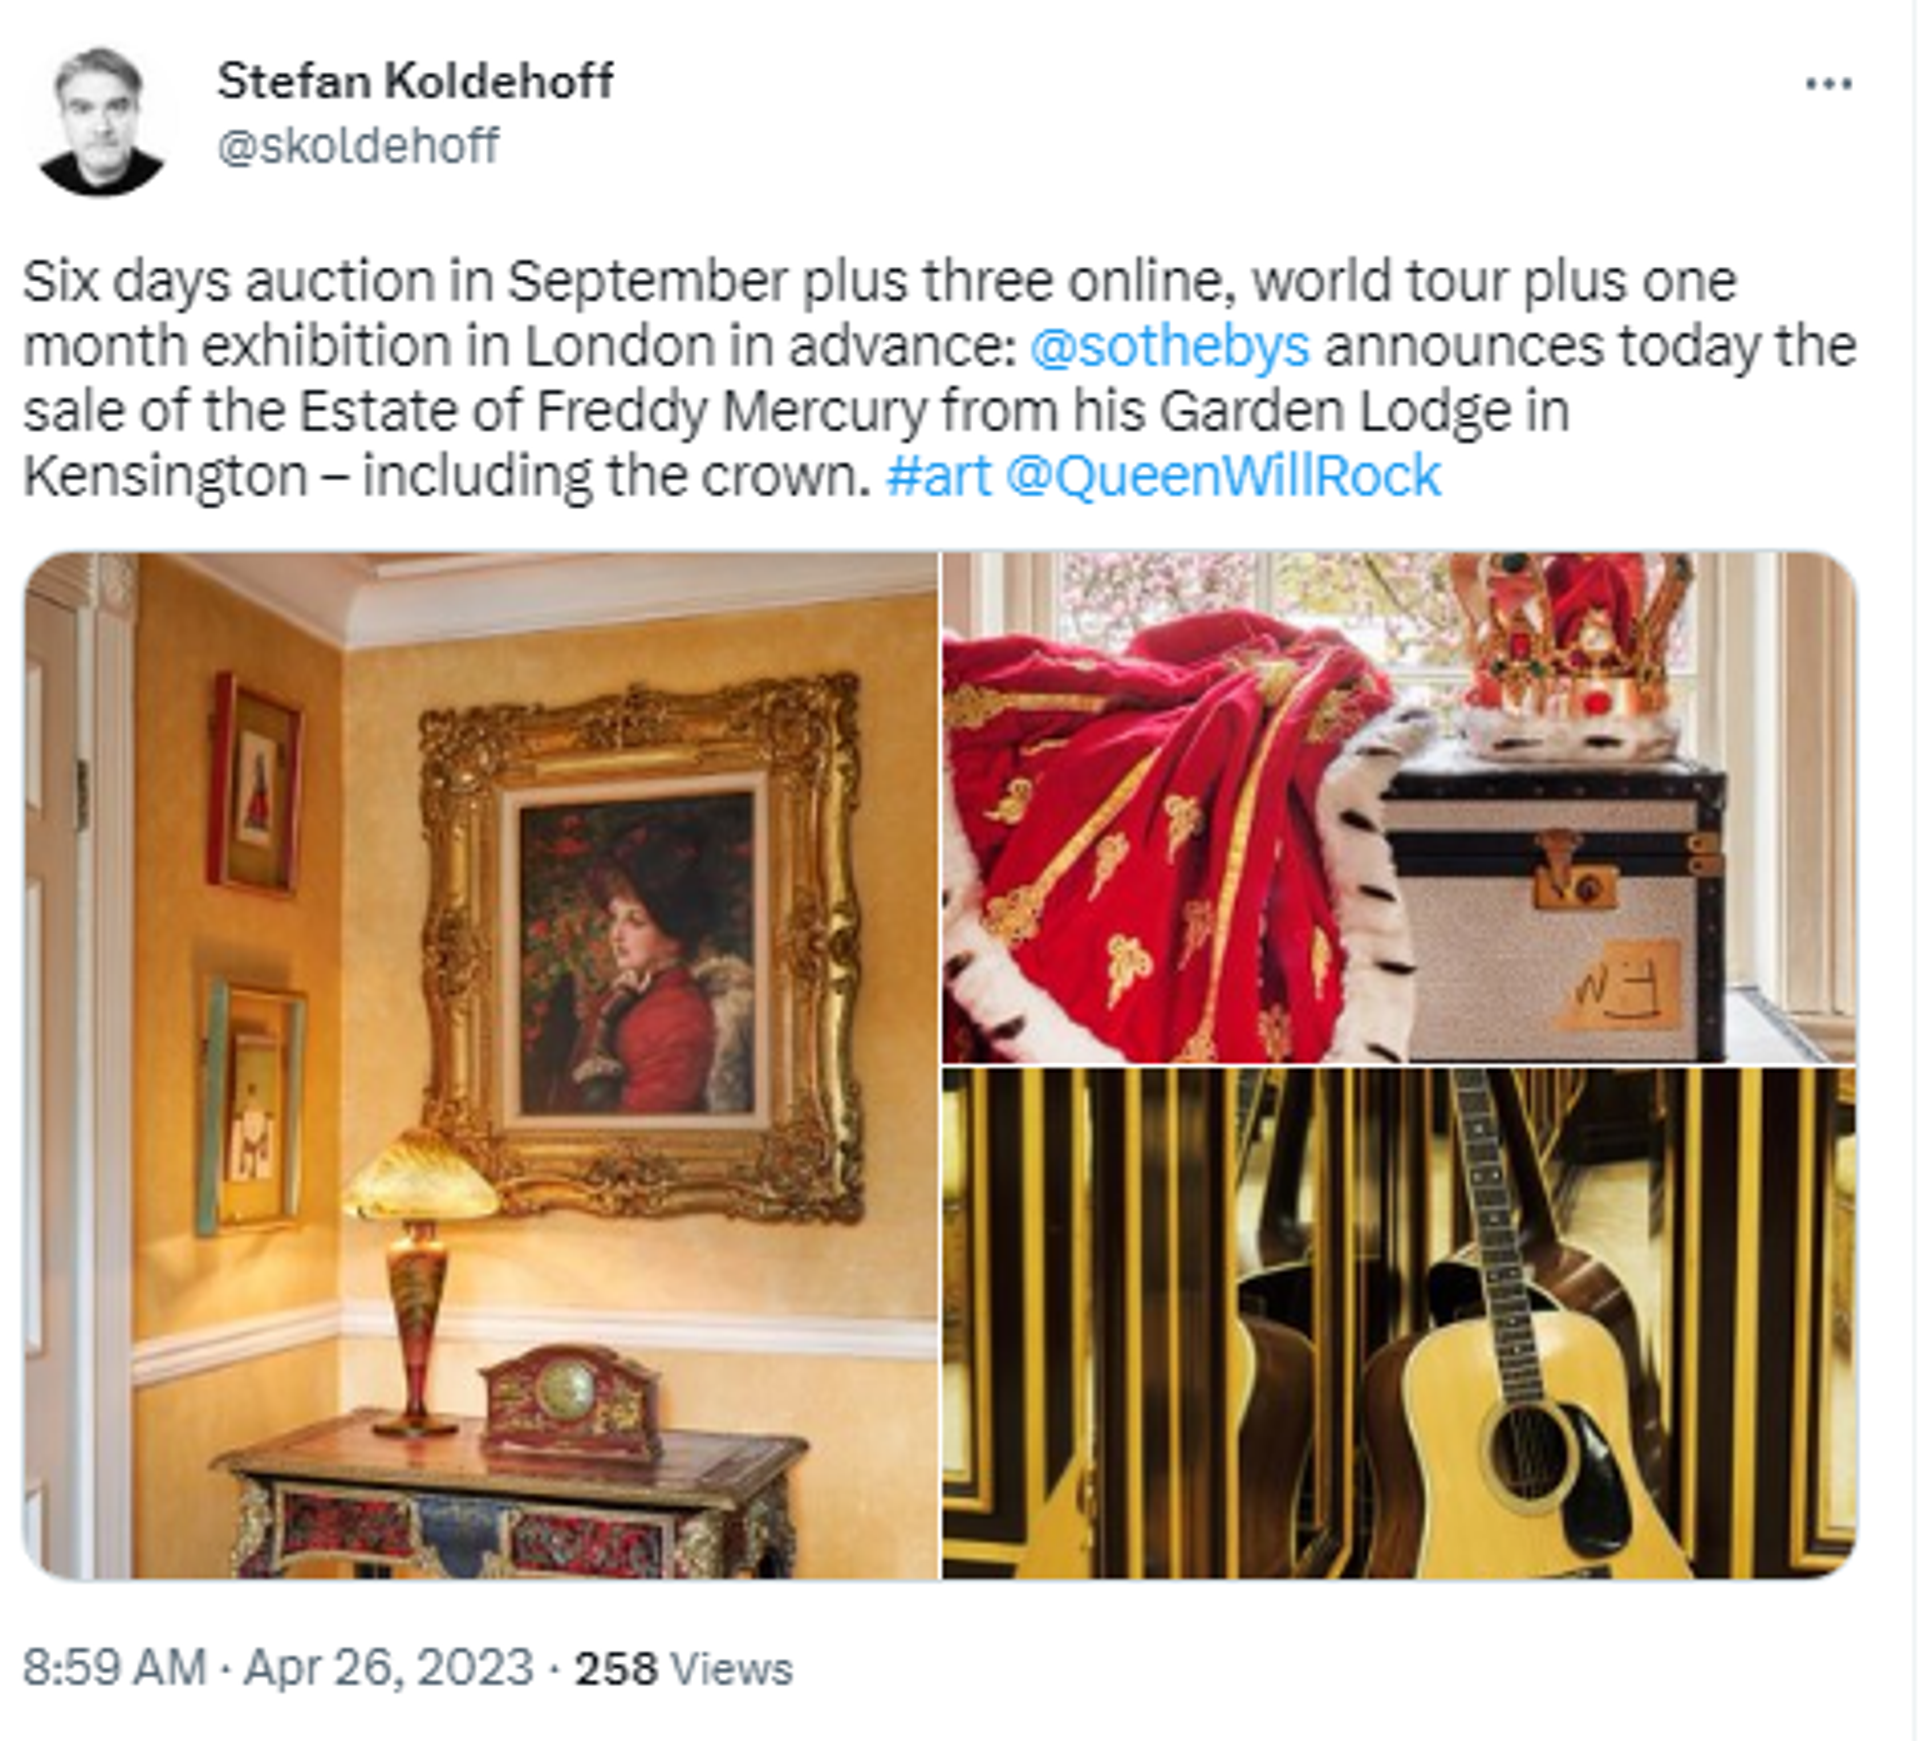 Twitter screenshot showing interior of Freddie Mercury's house in London, Garden Lodge. The belongings will be auctioned off at Sotheby's in September, 2023. - Sputnik International, 1920, 26.04.2023